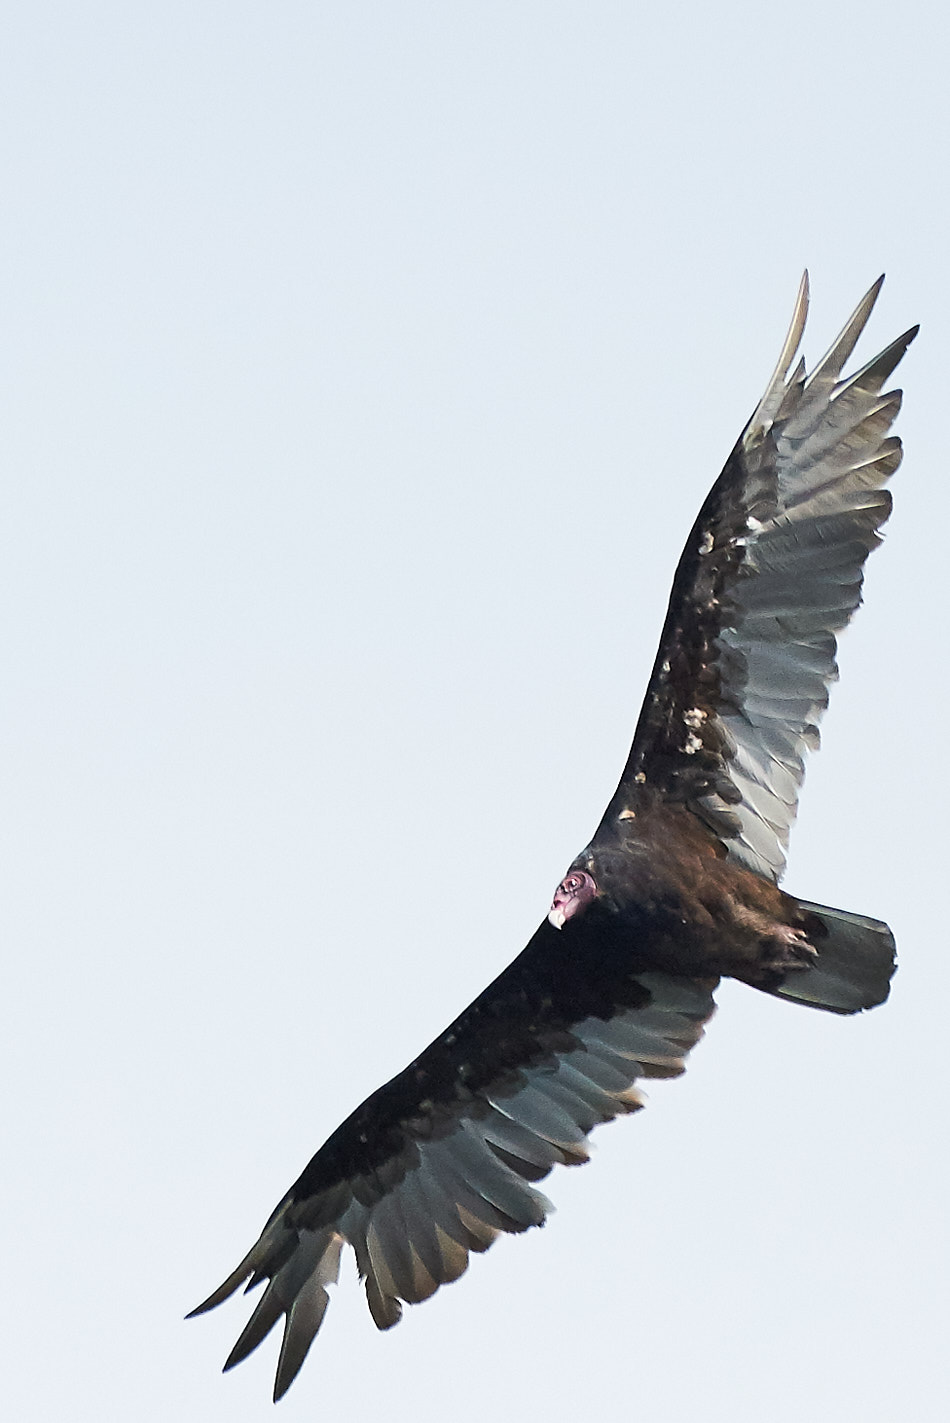 A turkey vulture swoops through the air above the Connecticut River